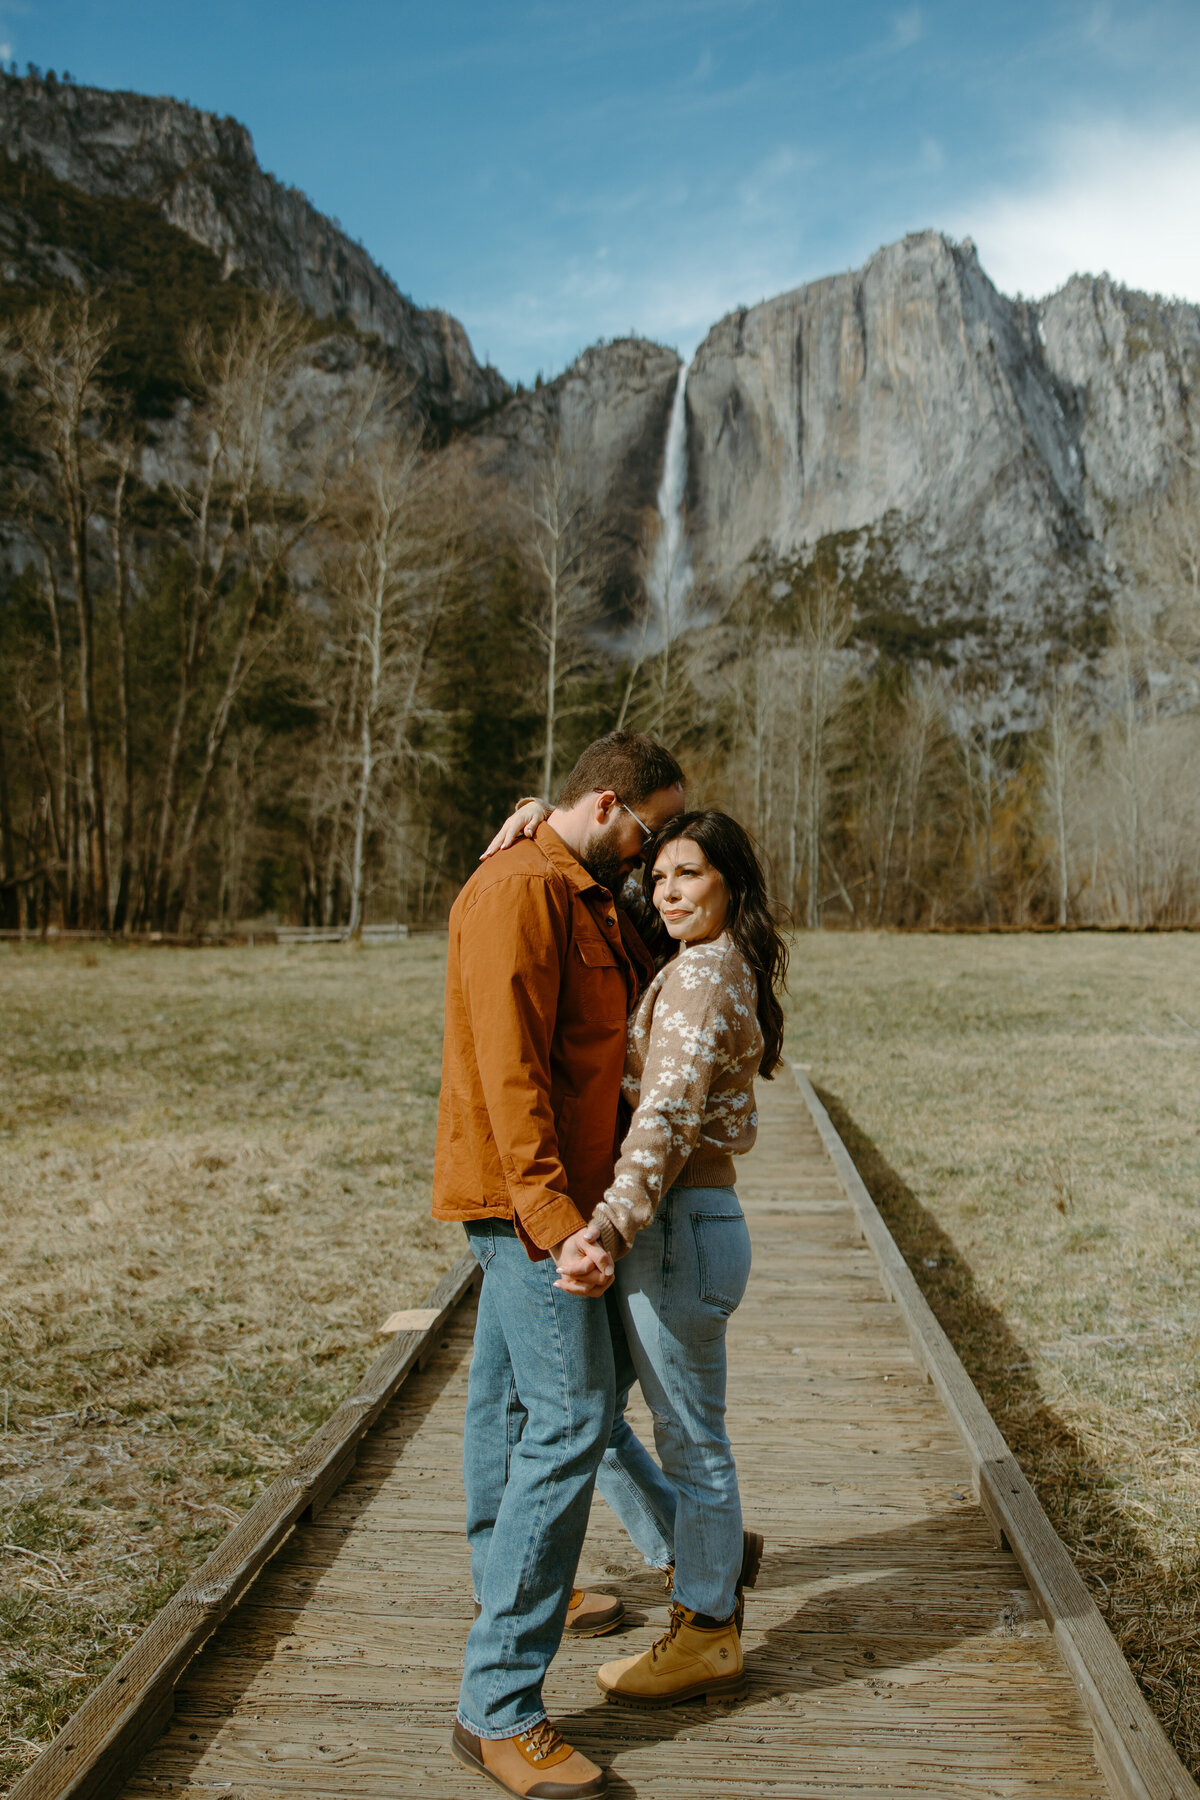 A couple stands on a pathway with a beautiful waterfall and rock formations in the background.